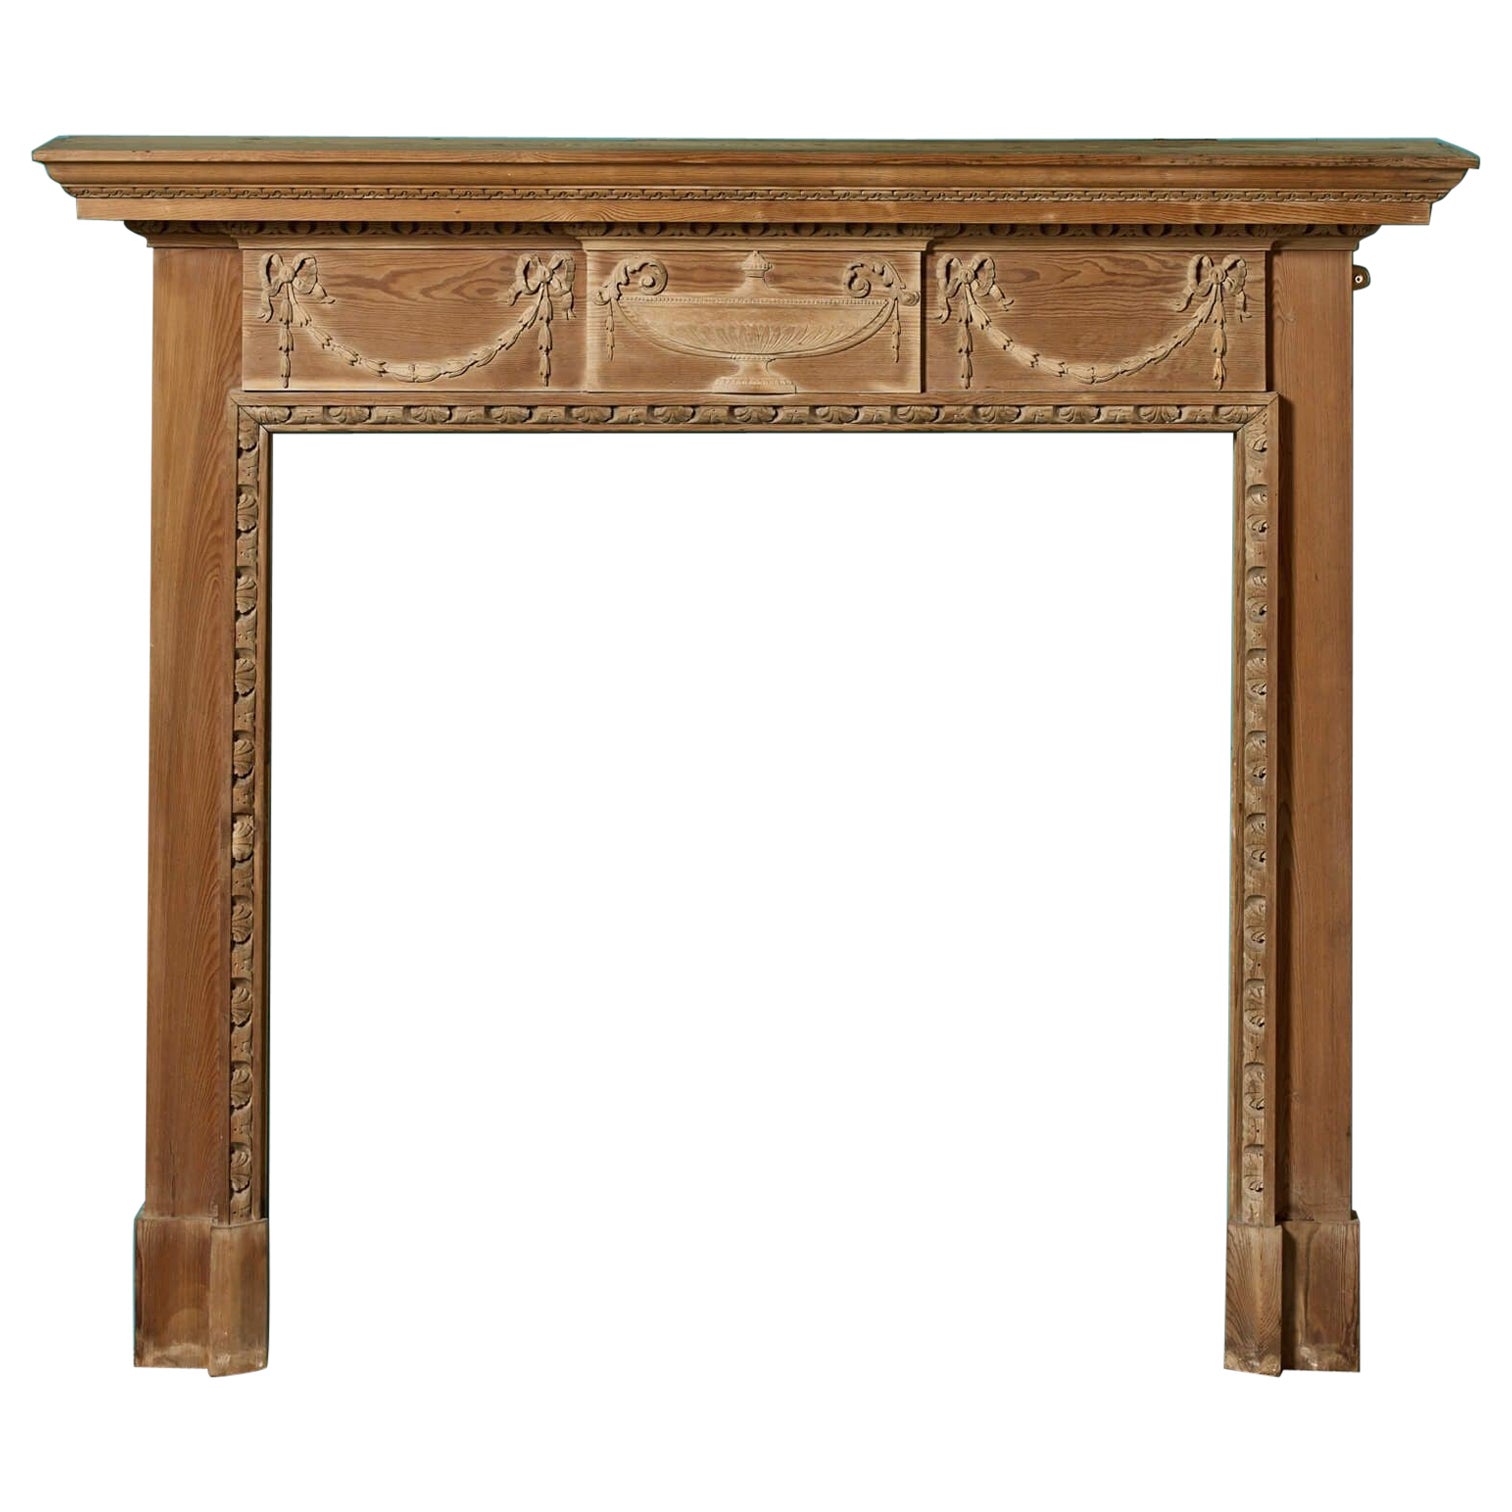 Neoclassical Style Antique Wooden Fire Mantel